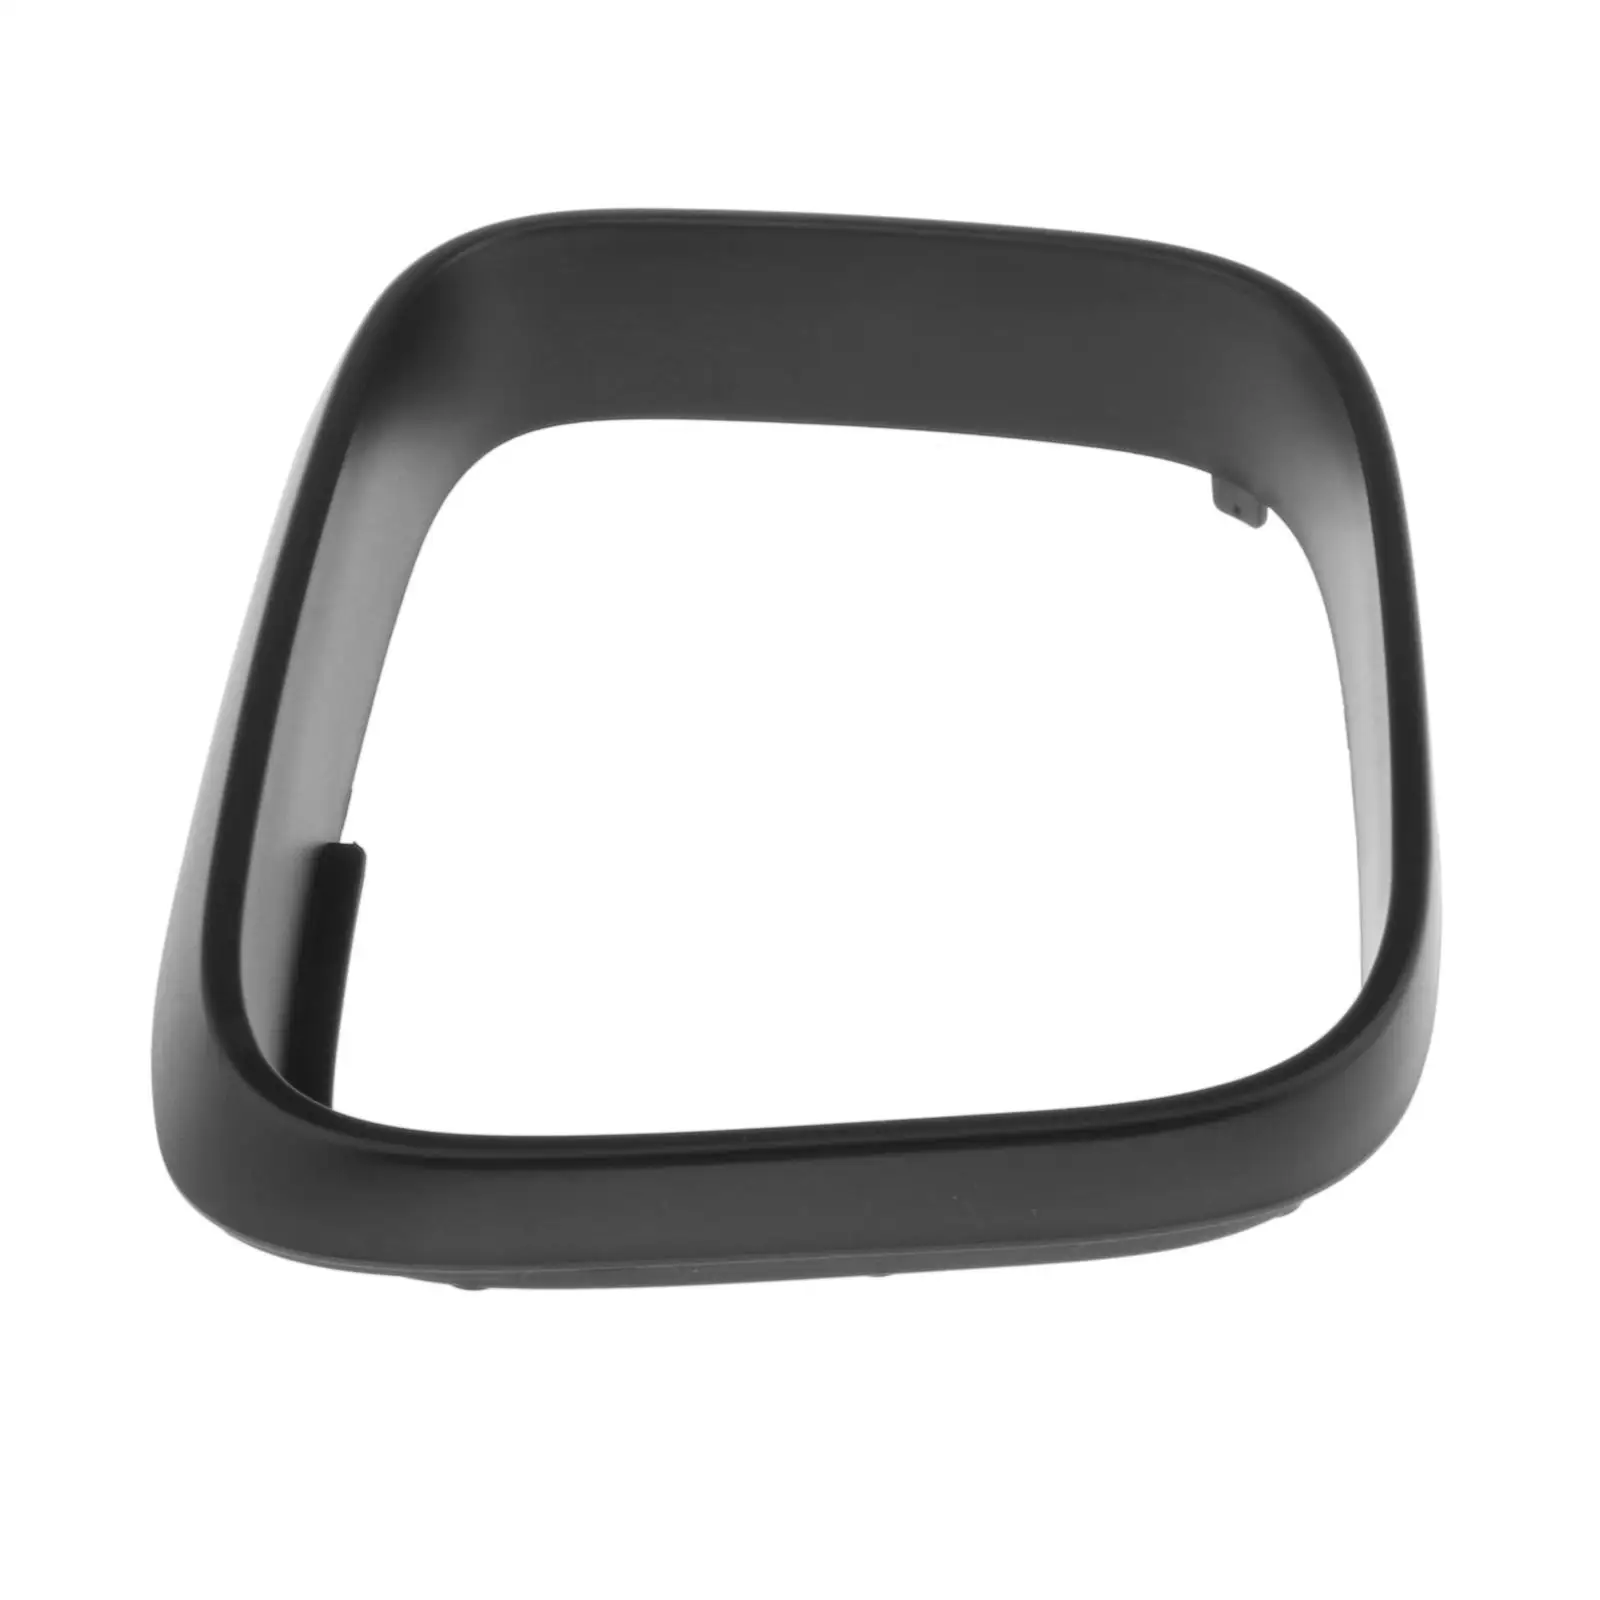 Car Right Mirror Cover Cap for vw T5 2003-2010 and Maxi 2004-Current Car Right Side Mirror Cover